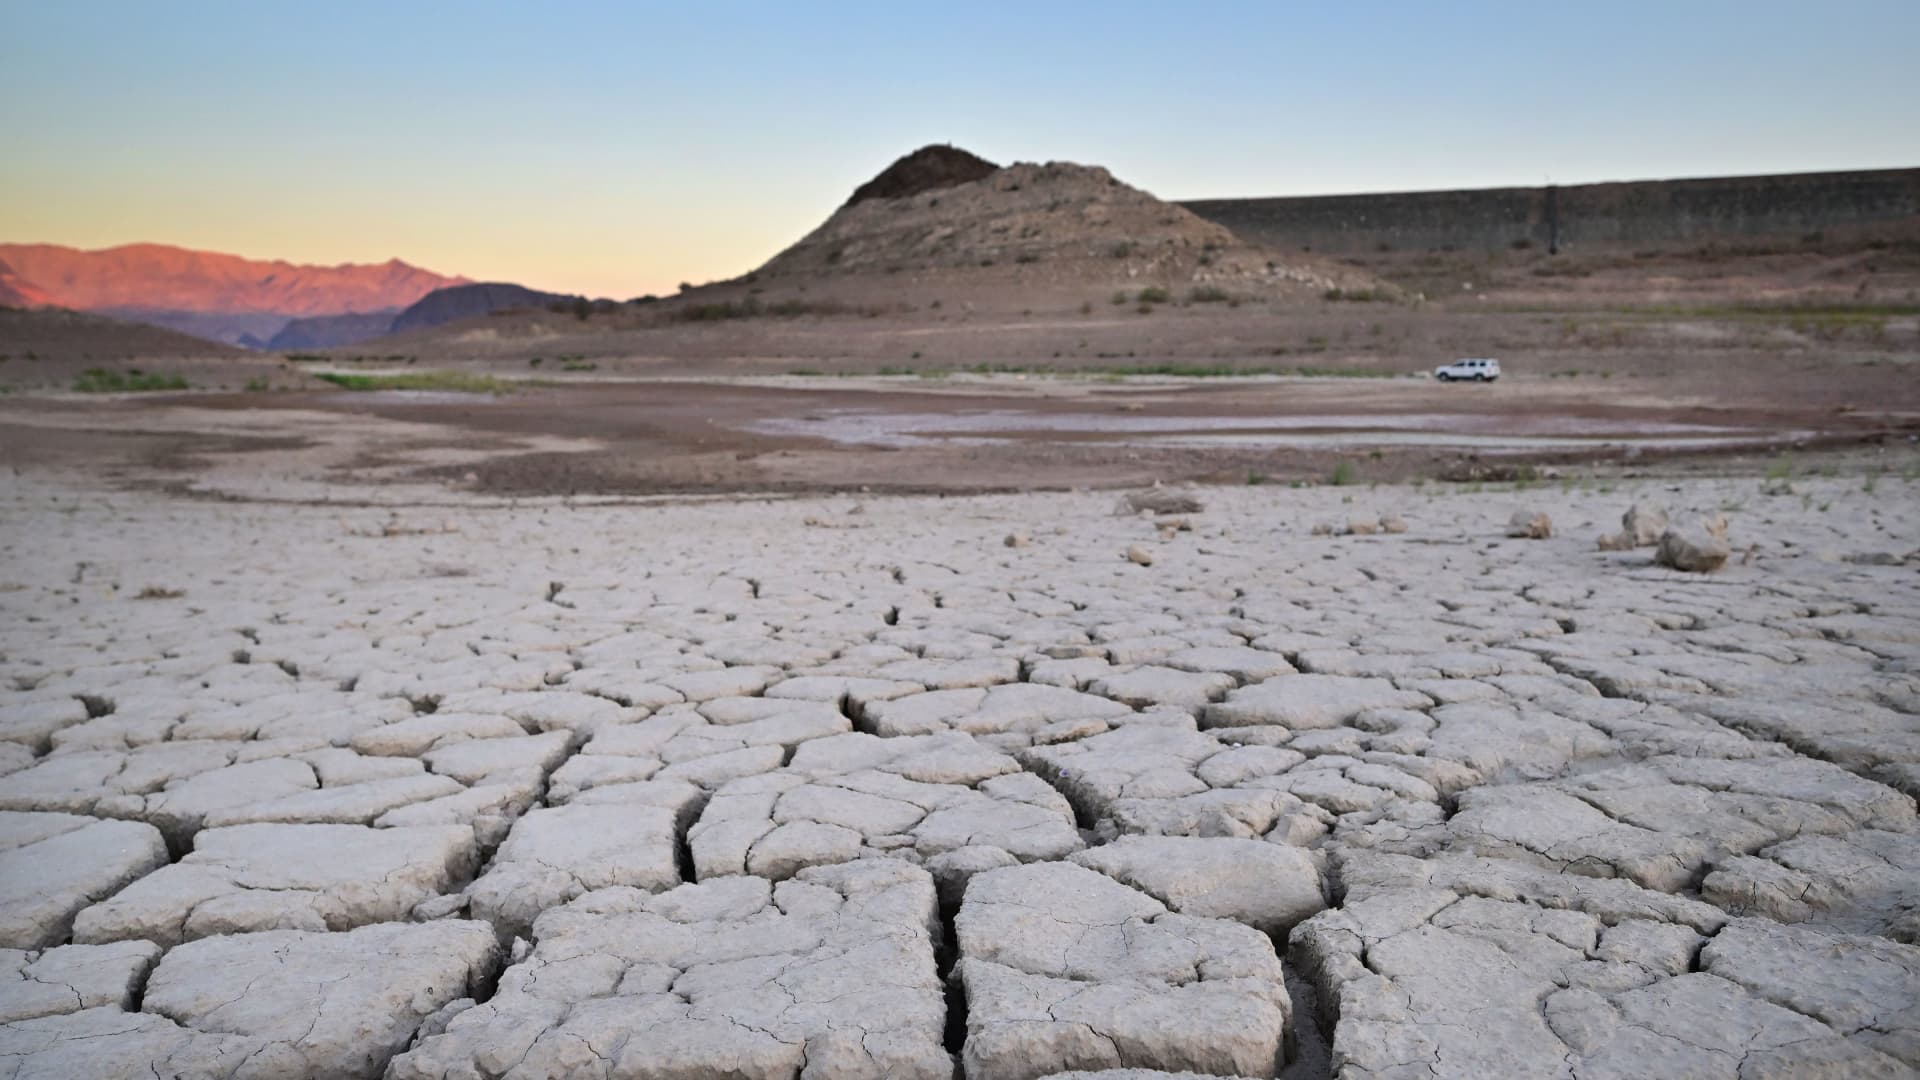 A vehicle drives past a dry, cracked lake bed on its way to Boulder Harbour in drought-stricken Lake Mead on September 15, 2022 in Boulder City, Nevada.